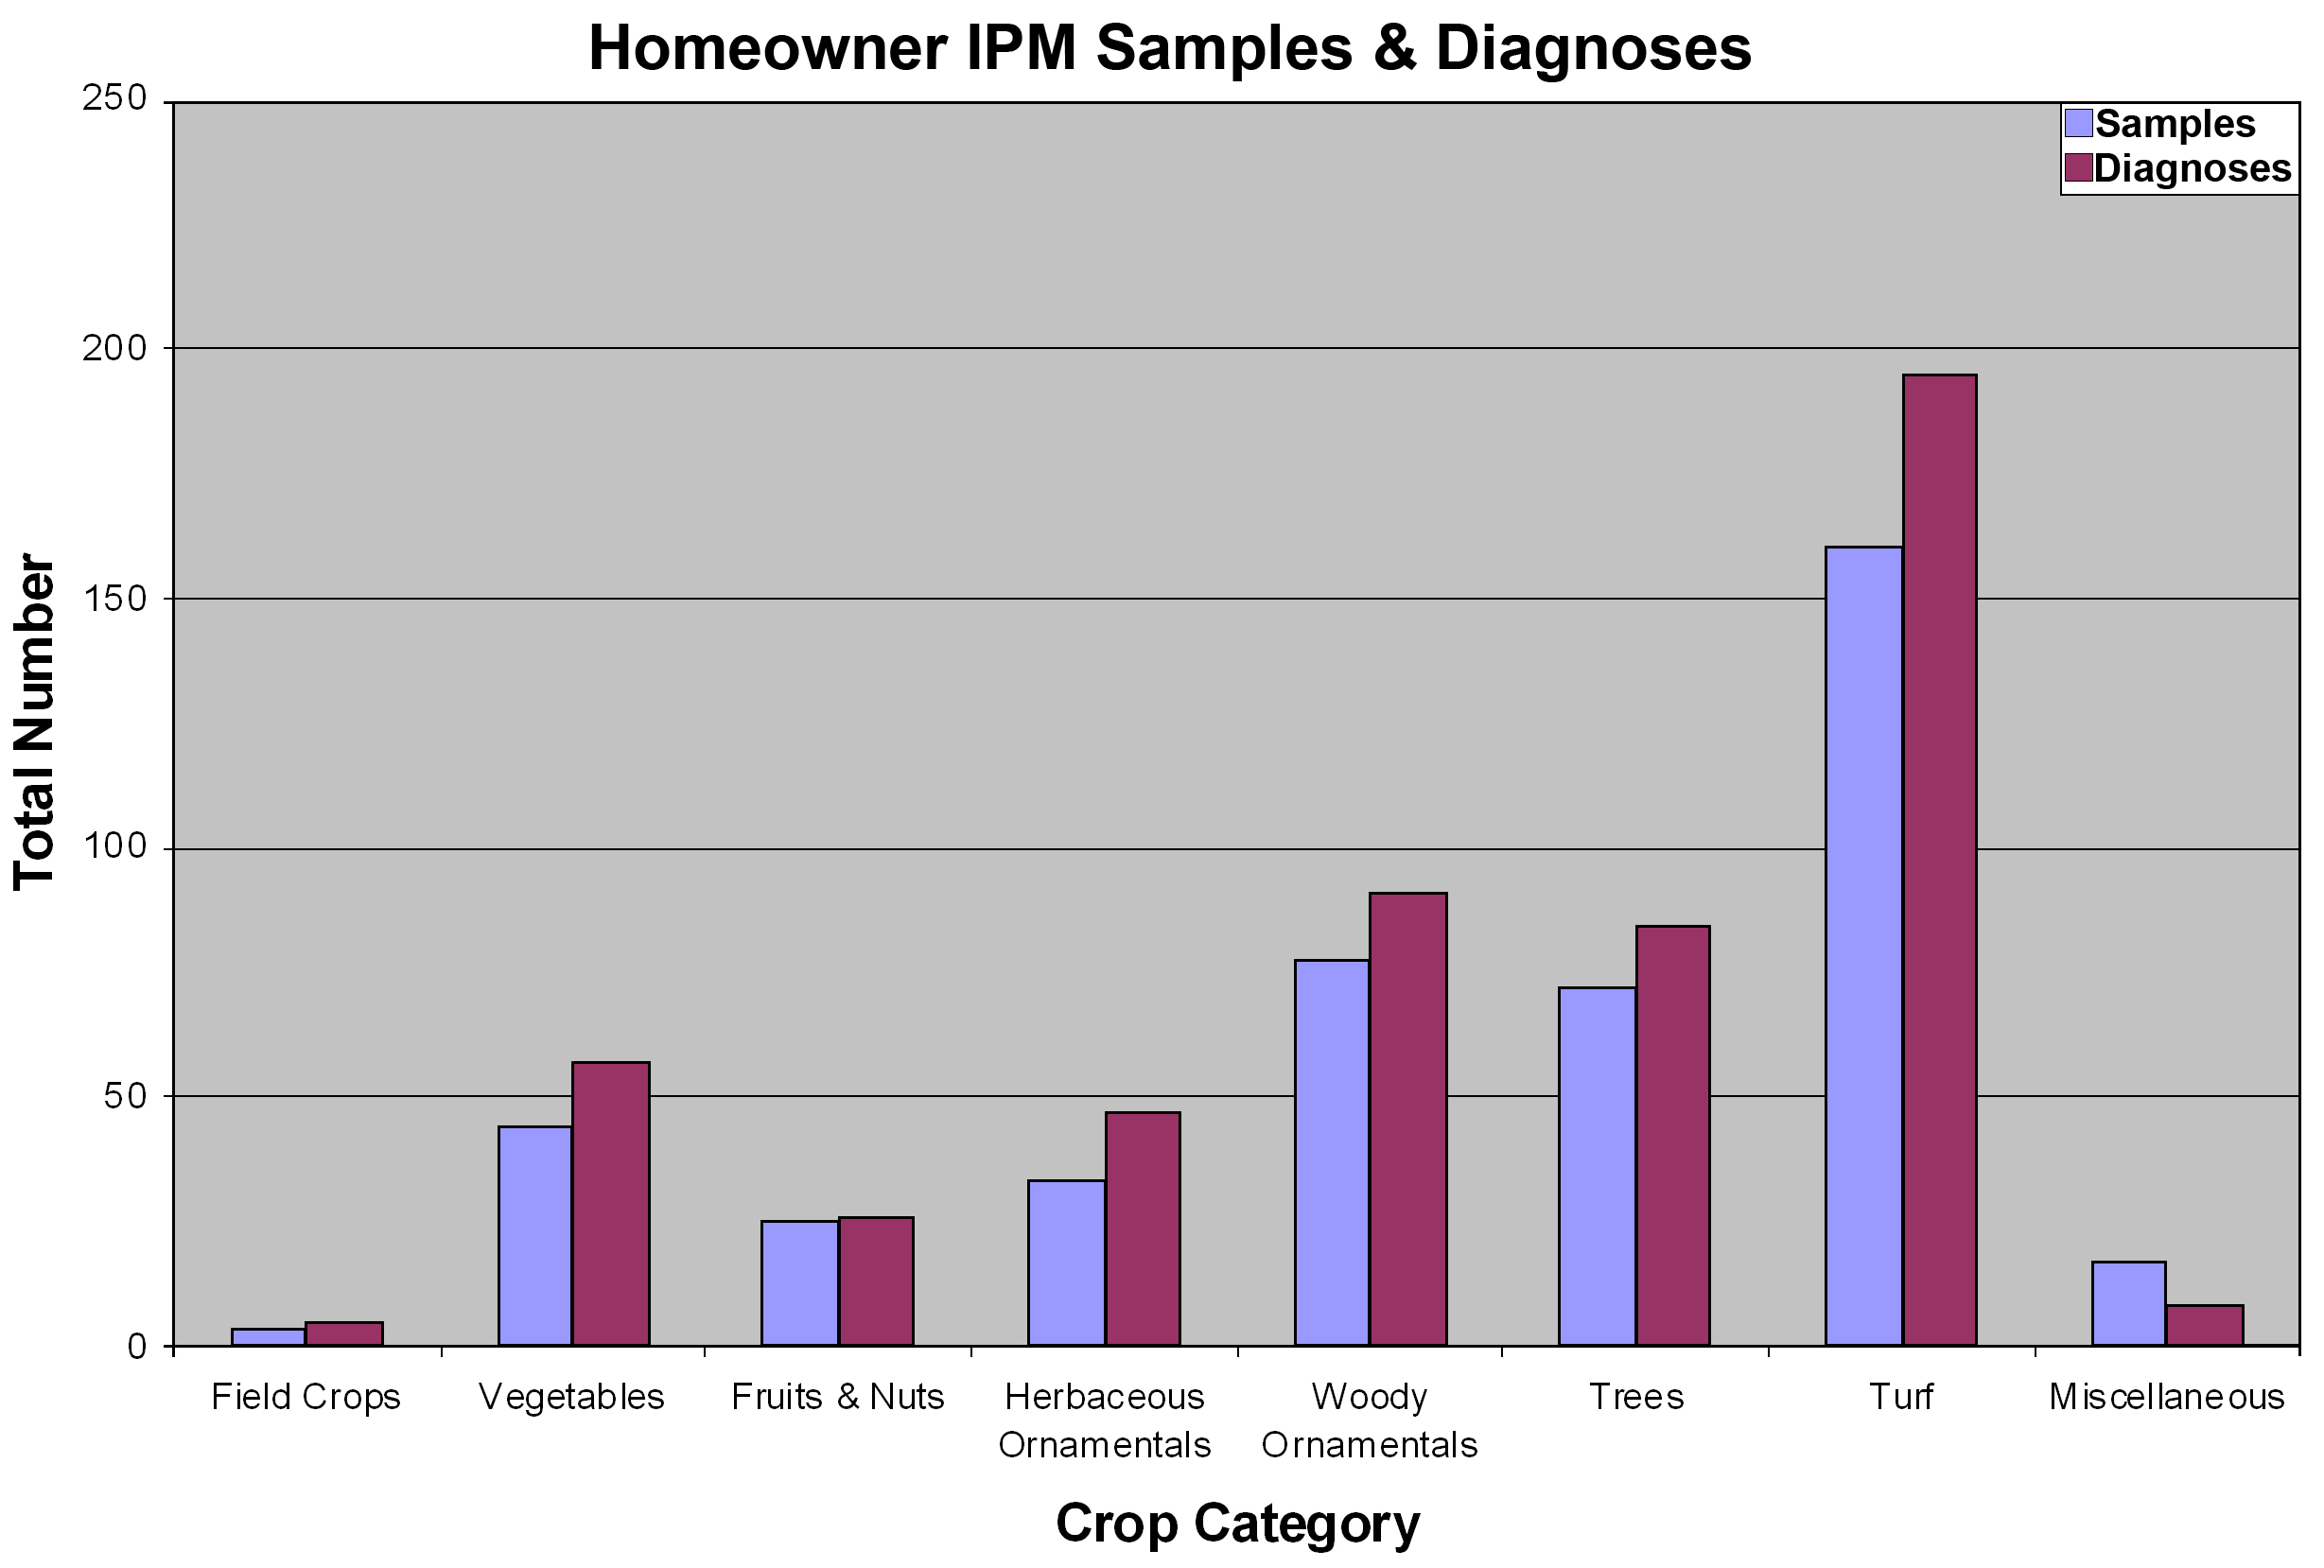 Bar graph of homeowner IPM samples and diagnoses. Field crops are the least common and turf are most common.